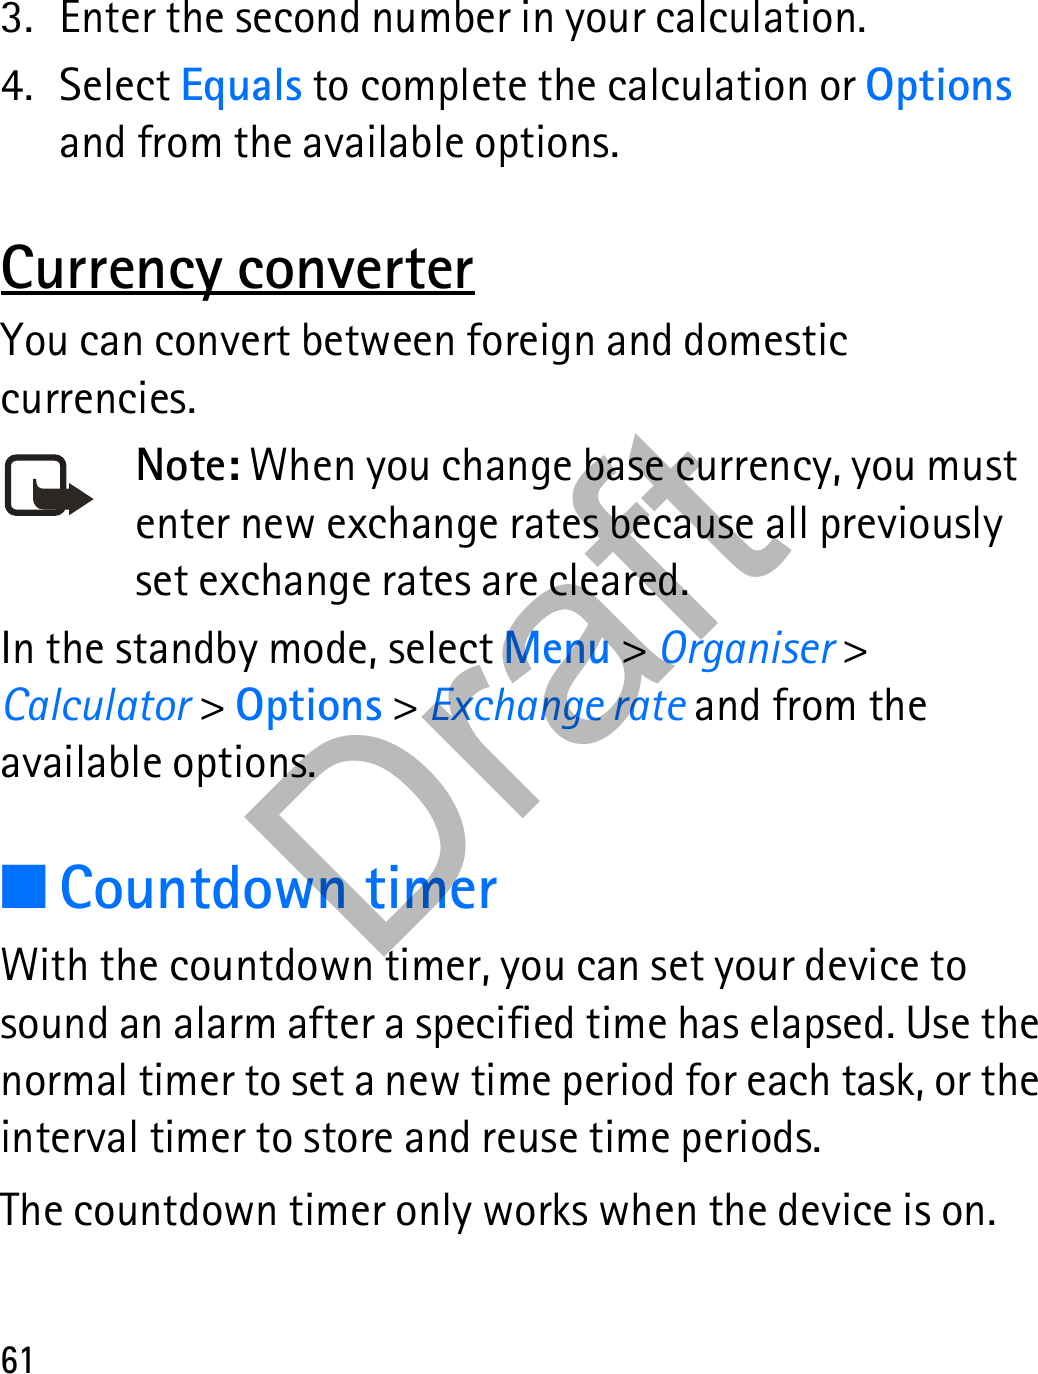 613. Enter the second number in your calculation.4. Select Equals to complete the calculation or Options and from the available options. Currency converterYou can convert between foreign and domestic currencies.Note: When you change base currency, you must enter new exchange rates because all previously set exchange rates are cleared.In the standby mode, select Menu &gt; Organiser &gt; Calculator &gt; Options &gt; Exchange rate and from the available options.■Countdown timerWith the countdown timer, you can set your device to sound an alarm after a specified time has elapsed. Use the normal timer to set a new time period for each task, or the interval timer to store and reuse time periods. The countdown timer only works when the device is on.Draft